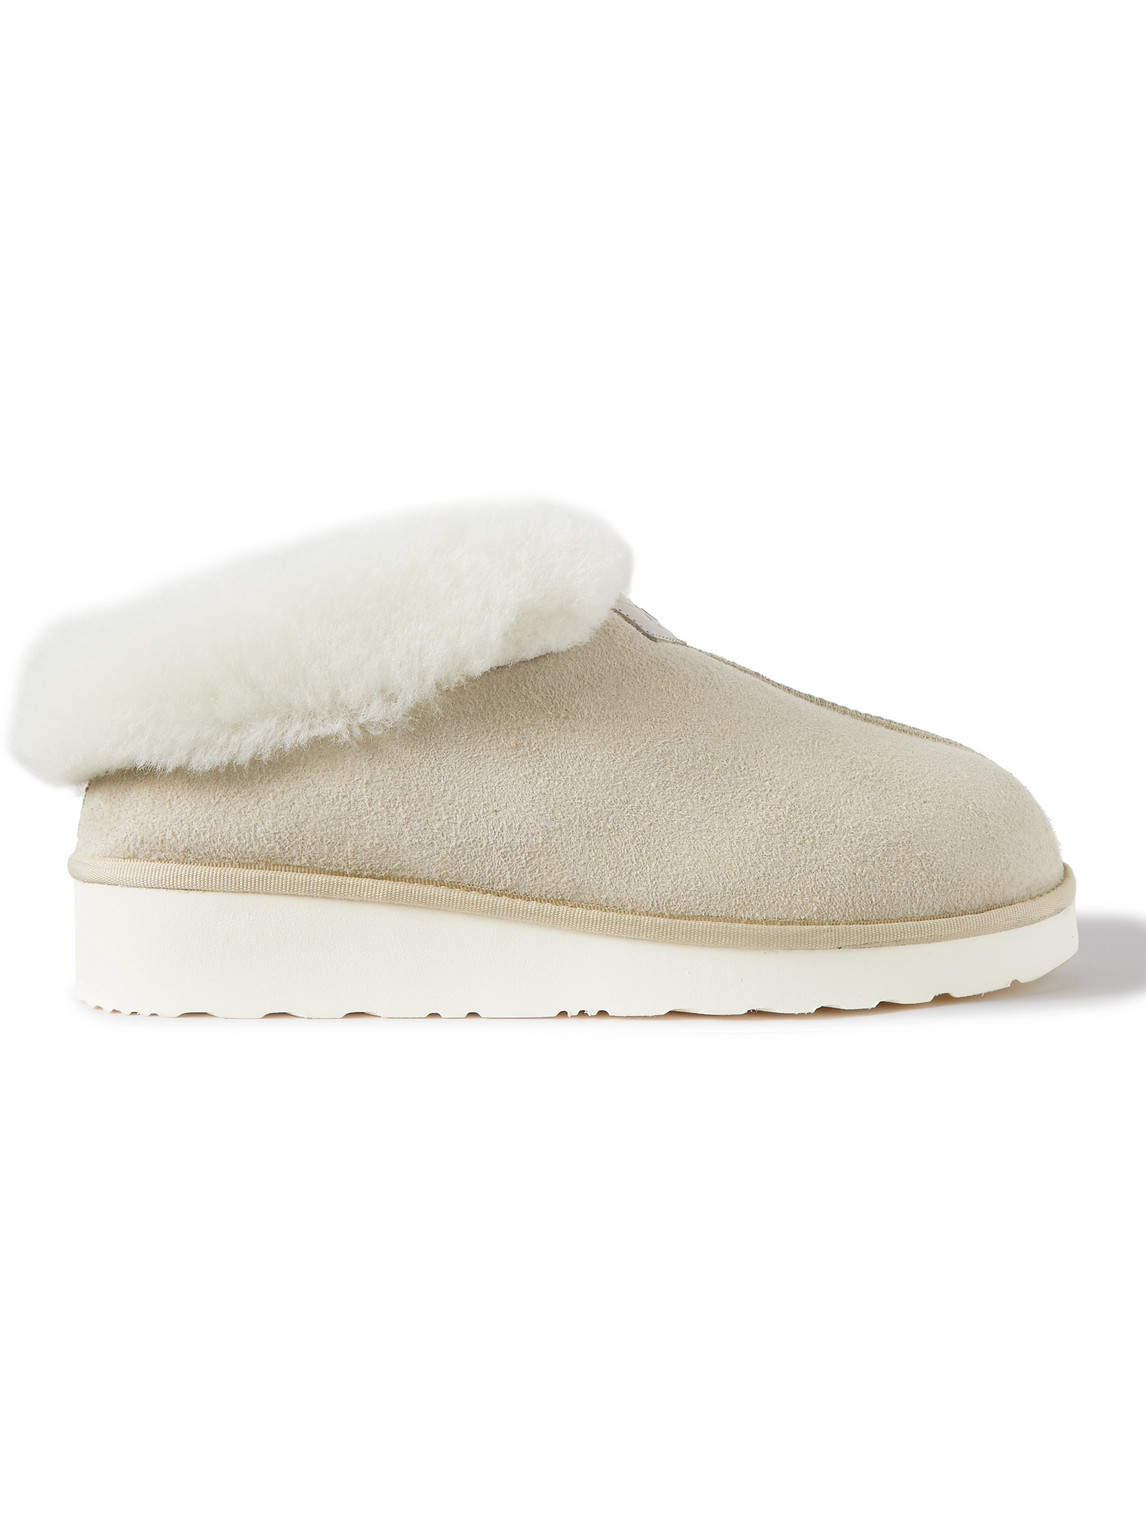 Wyeth Shearling-Lined Suede Slippers